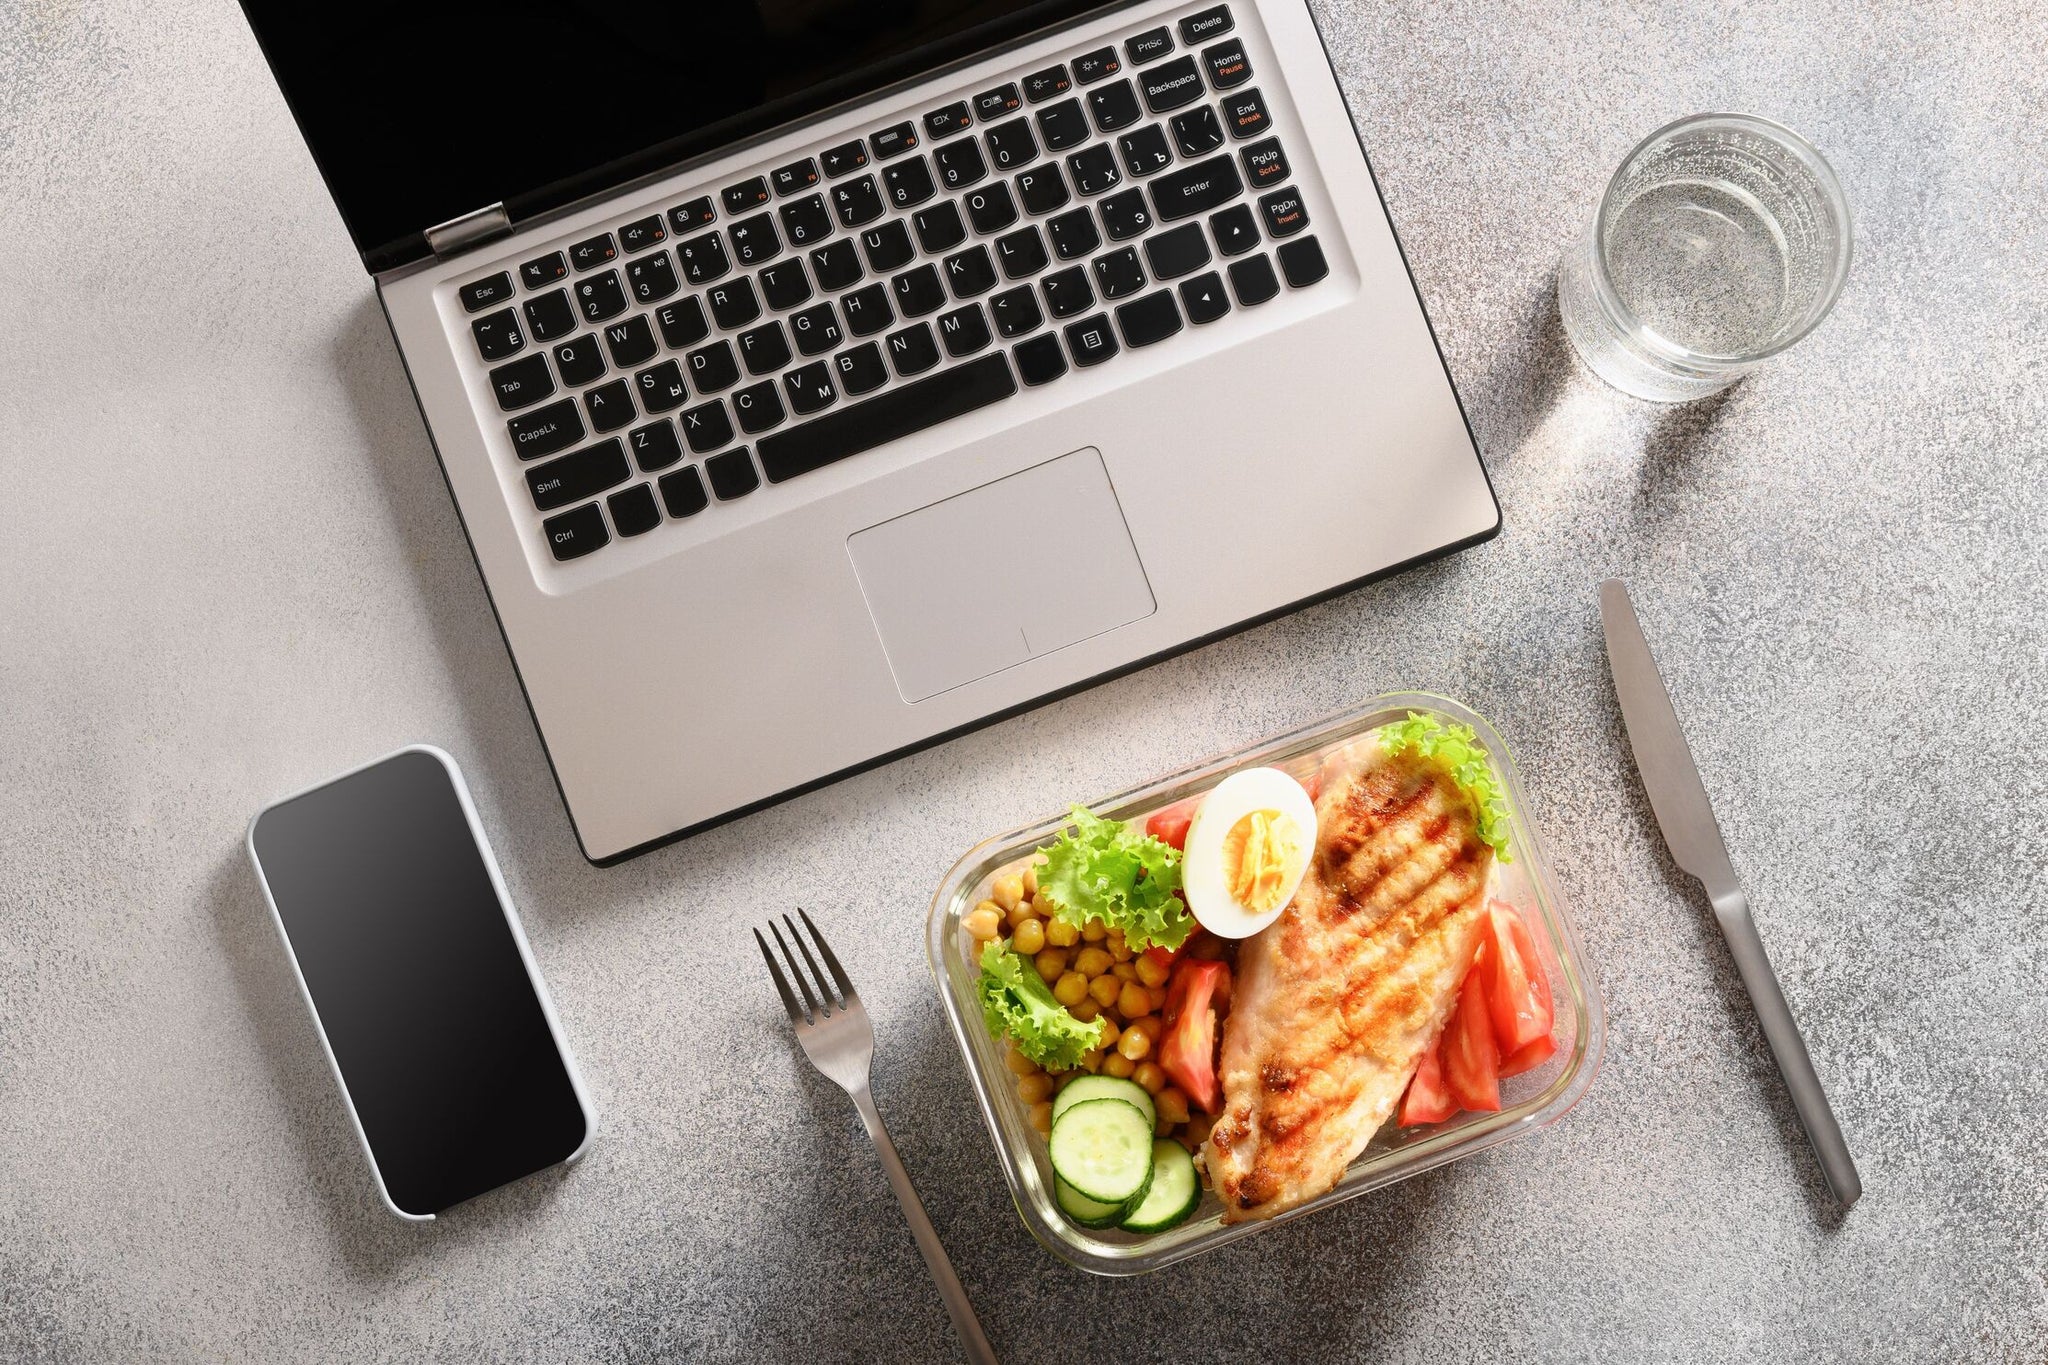 Make-the-Right-Choice-10-Tips-for-Choosing-a-Healthy-Lunch-for-Work OdinLake